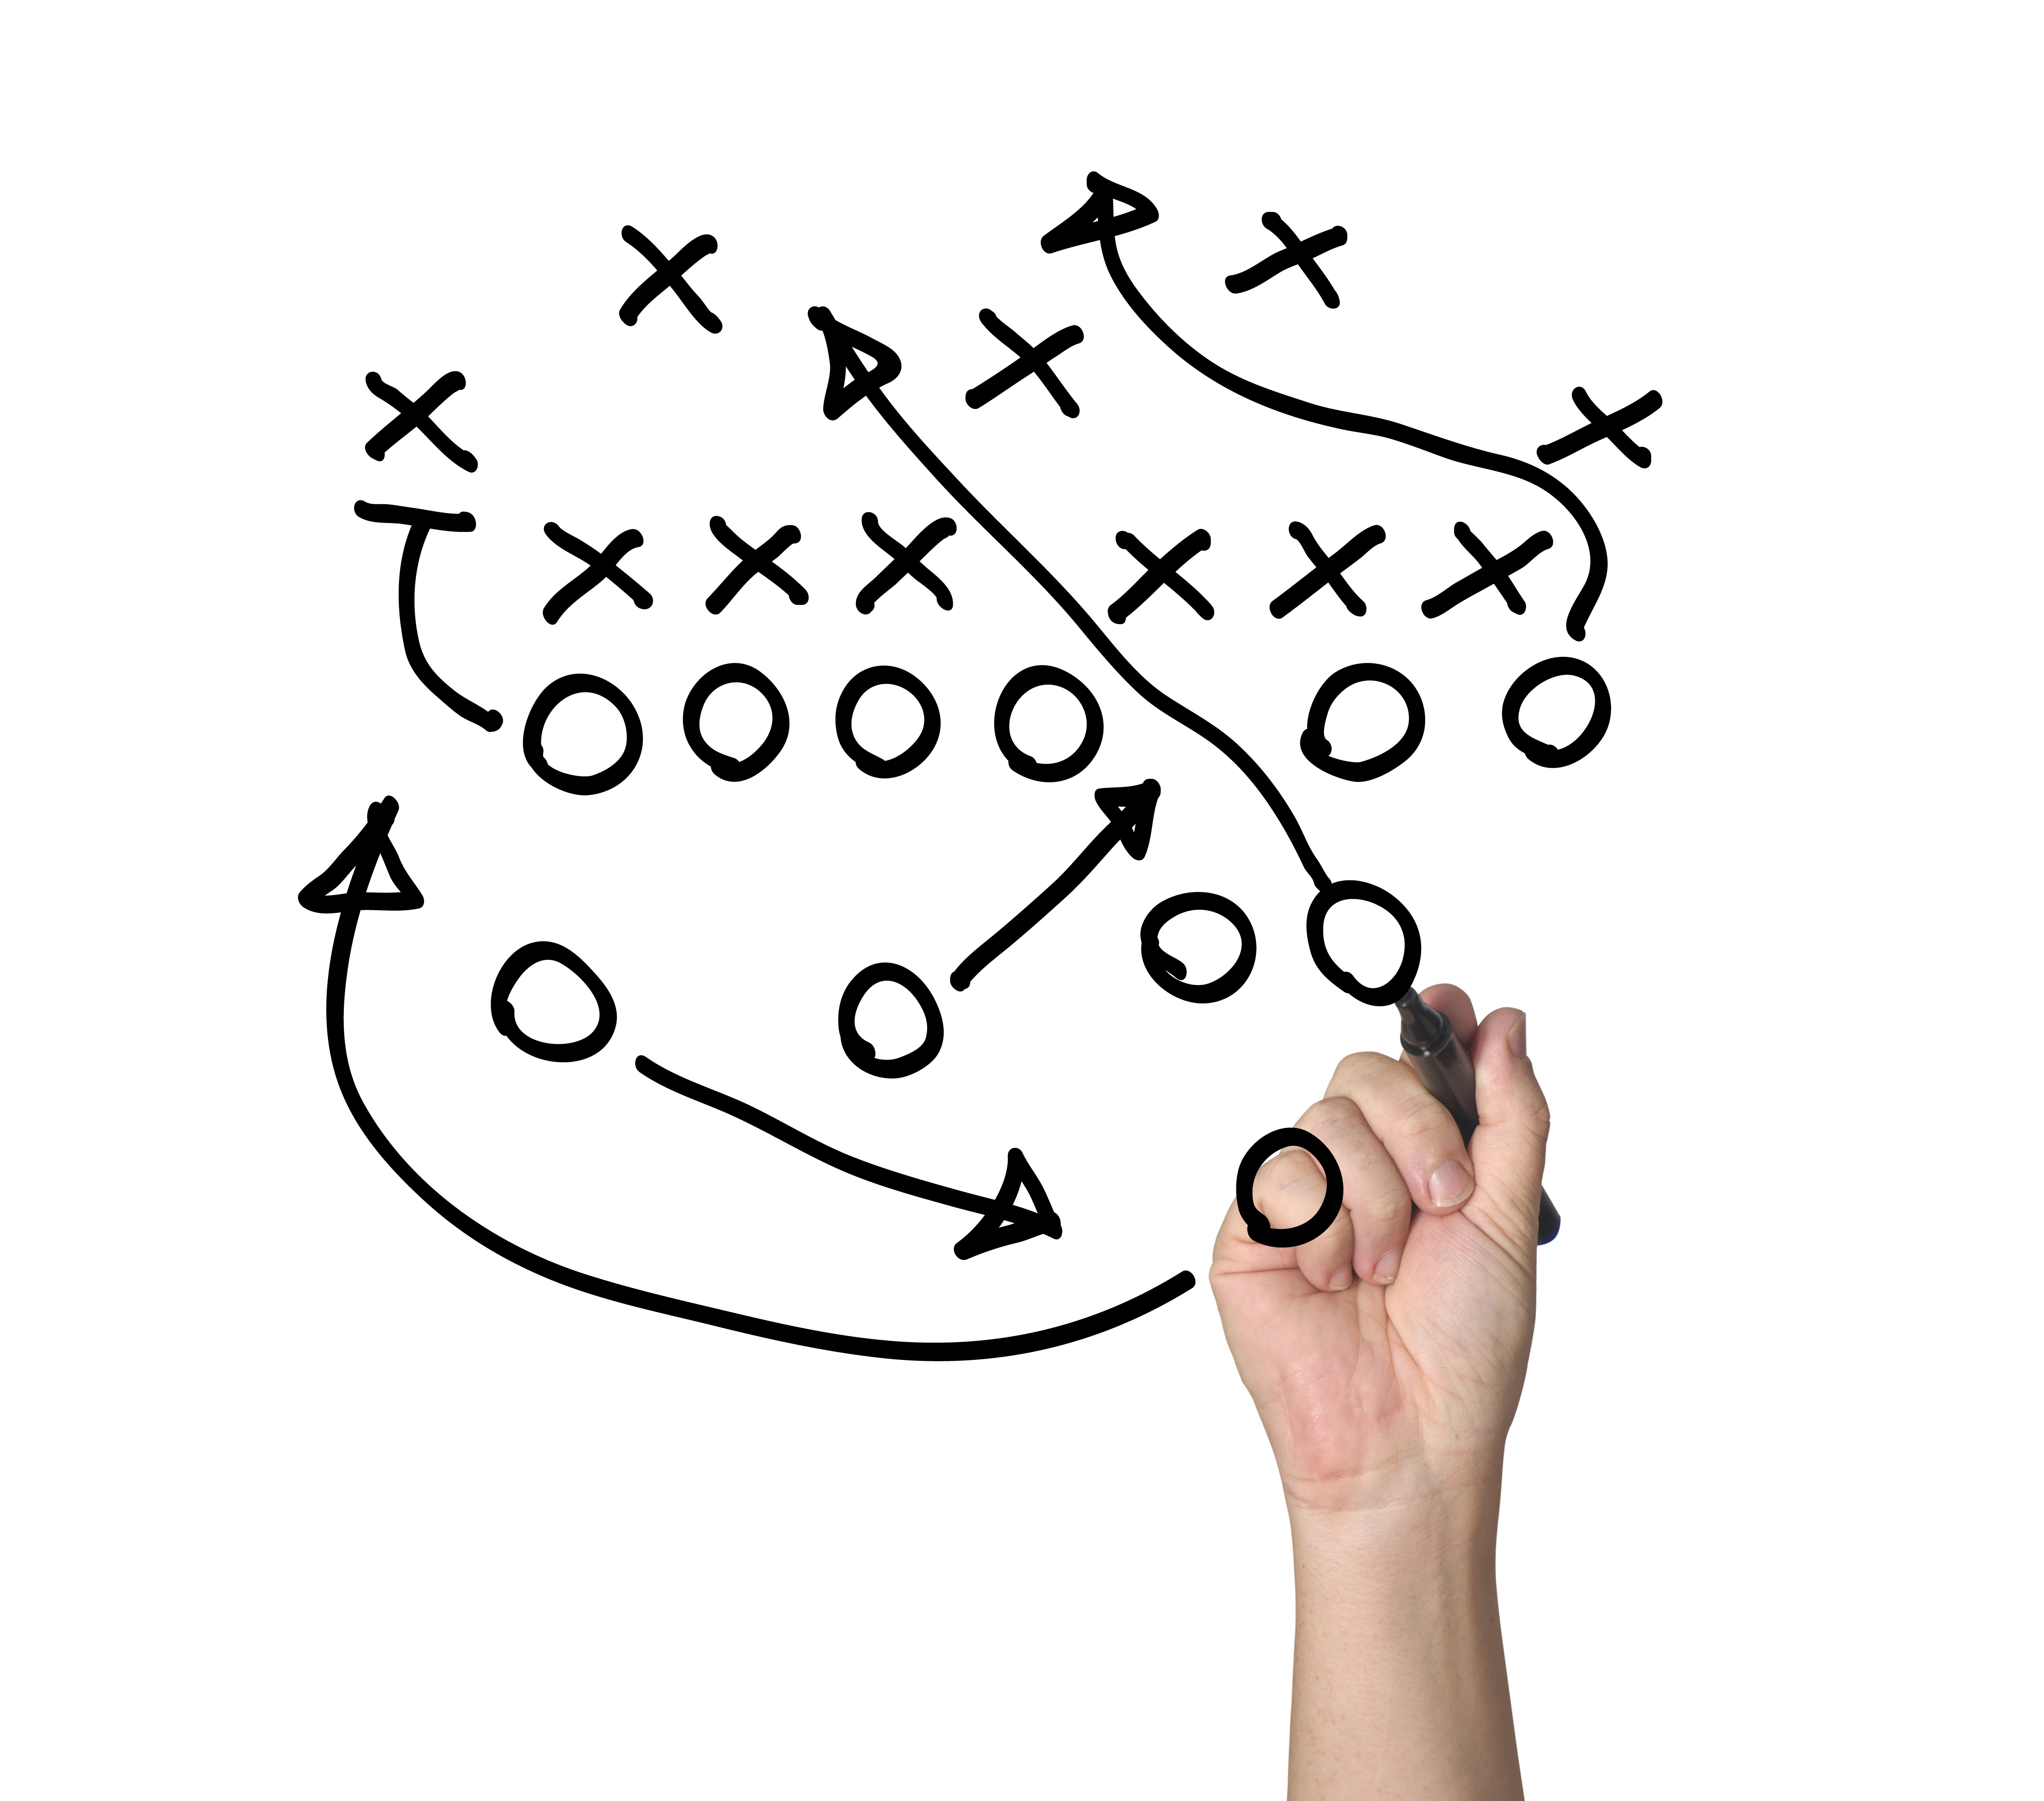 Business lessons can be learned from NFL players and coaches